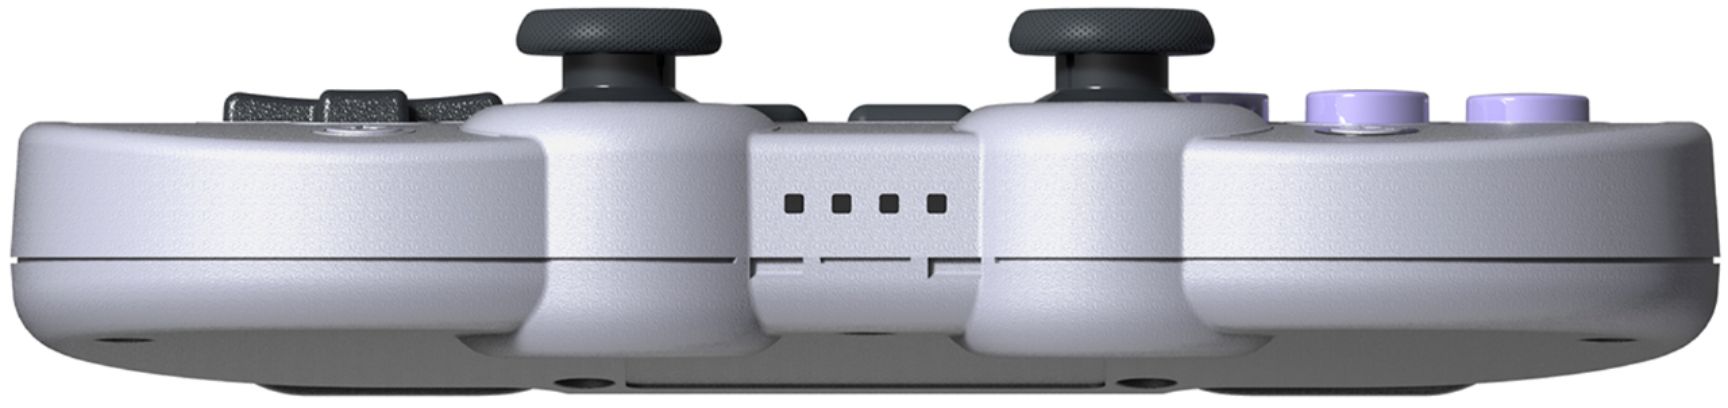 best buy pro controller switch